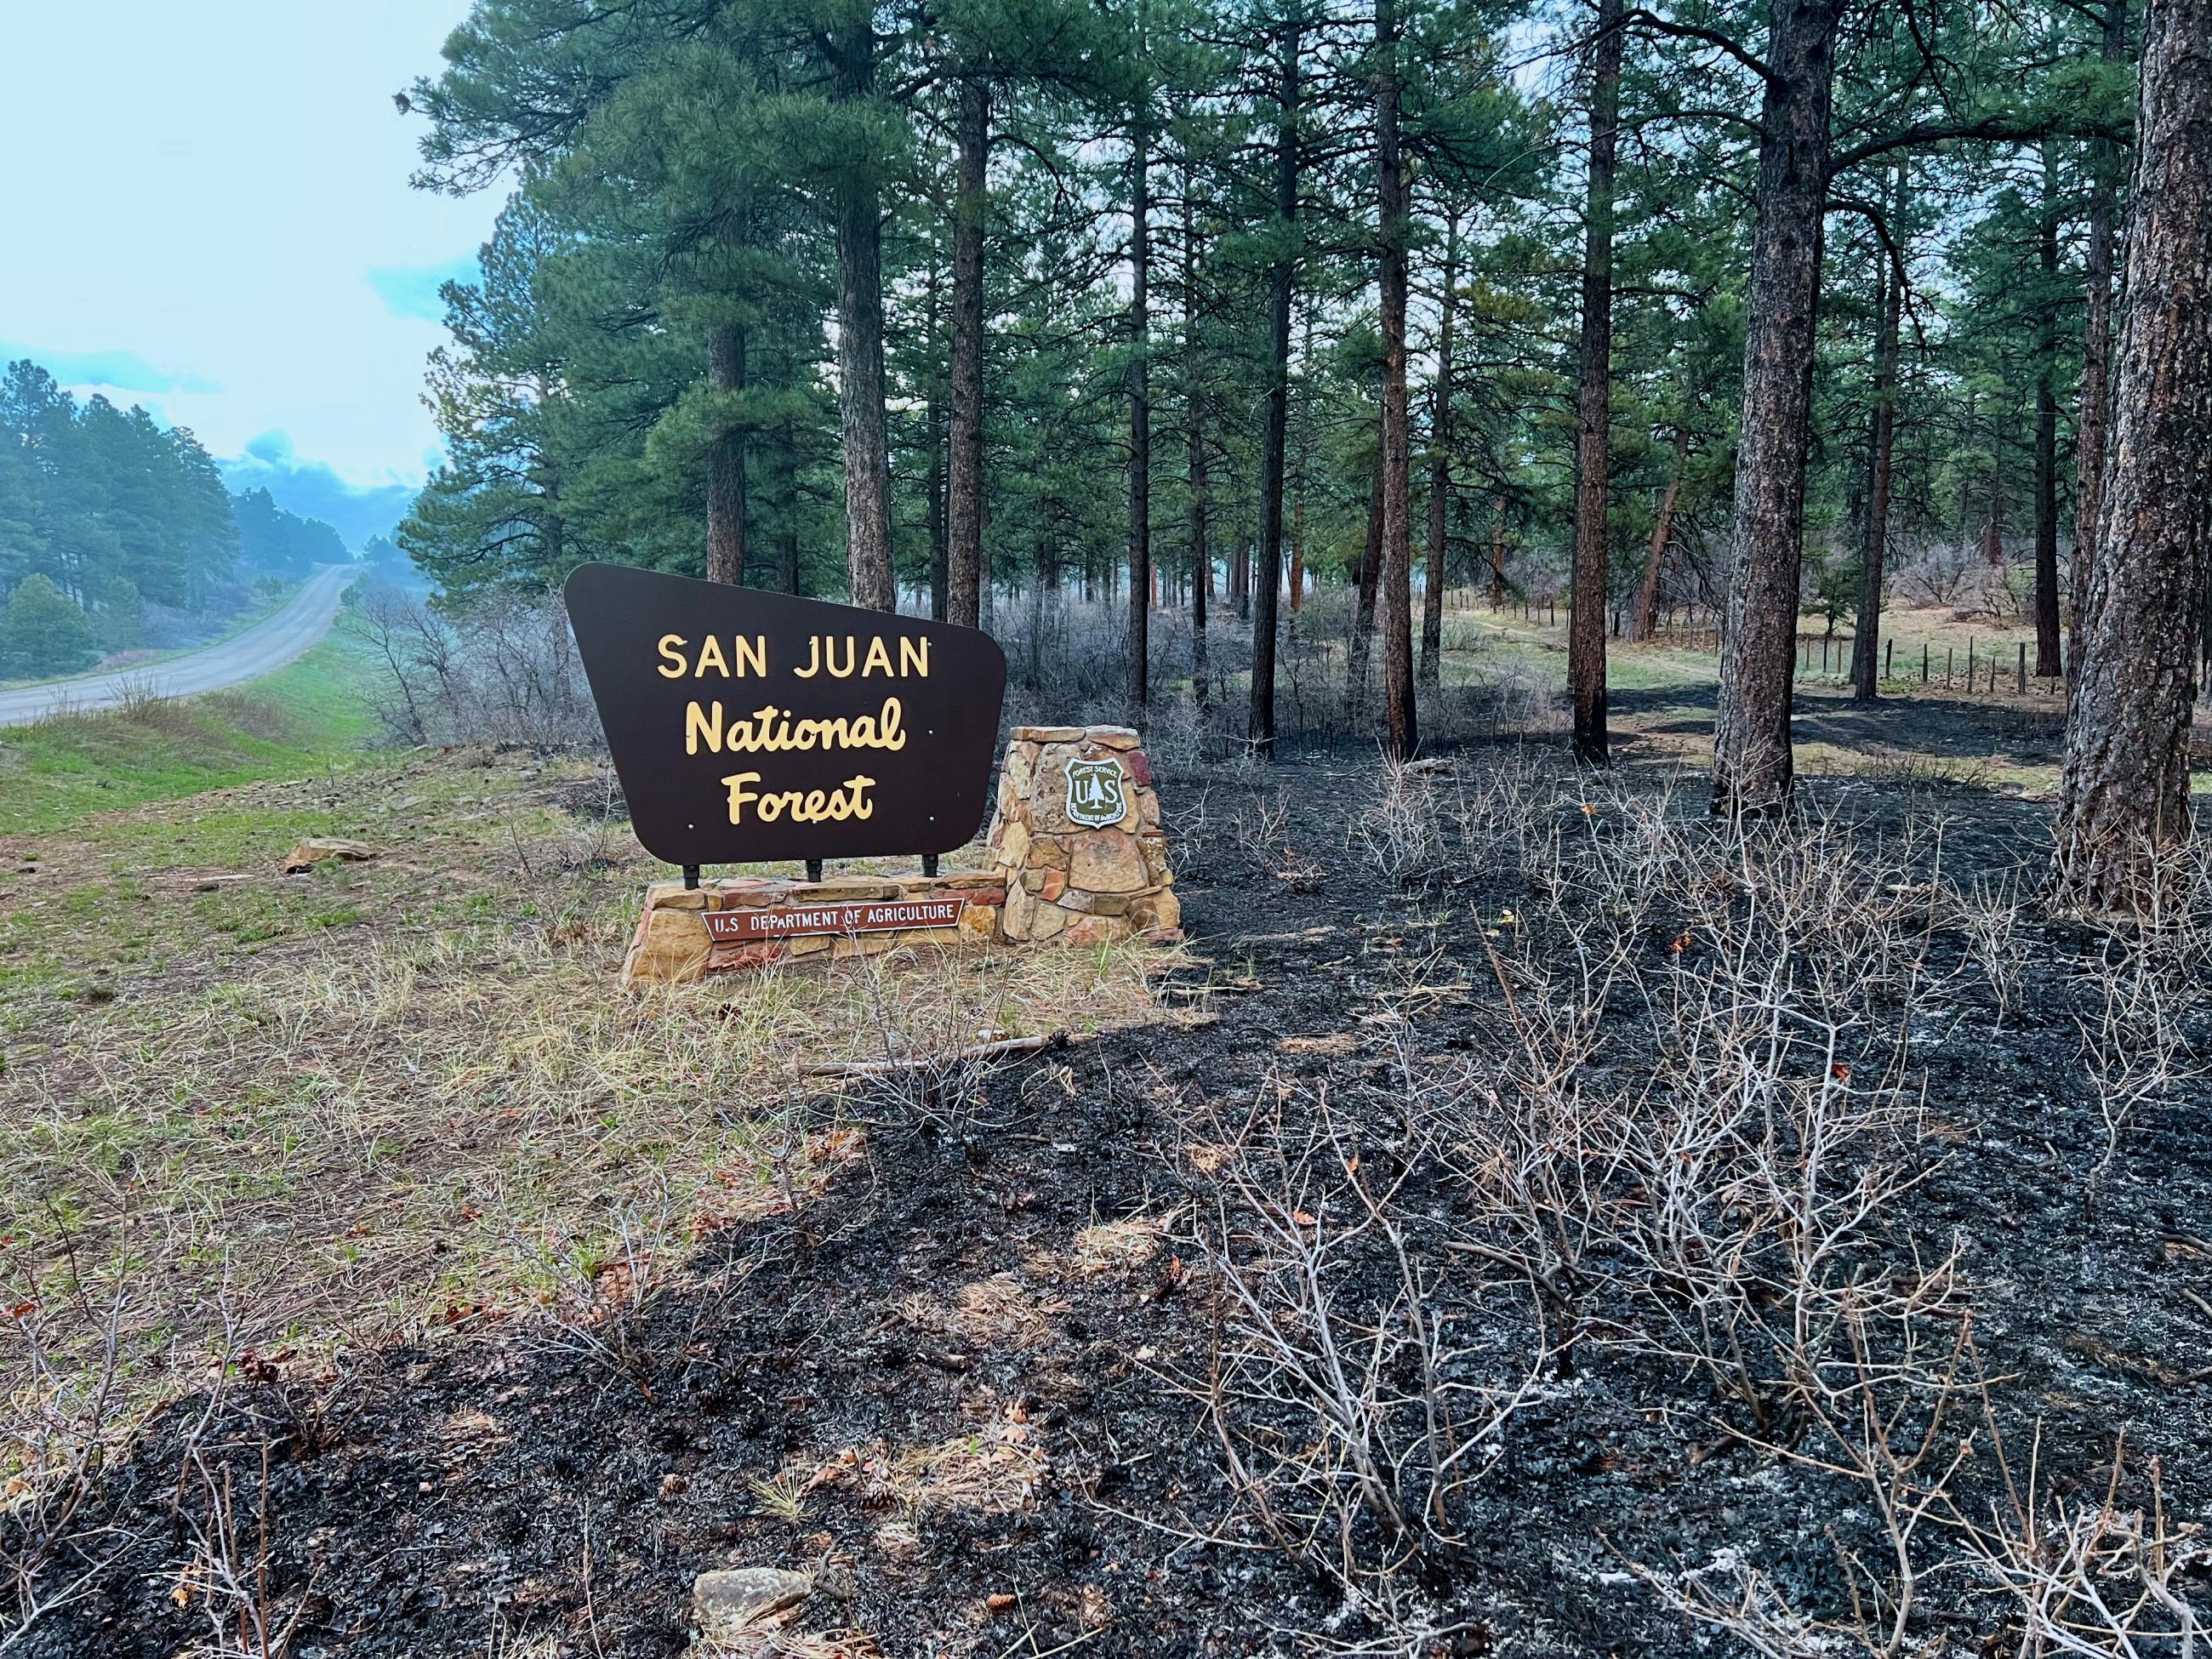 A burned grassy area is seen near a "San Juan National Forest" sign along a highway.